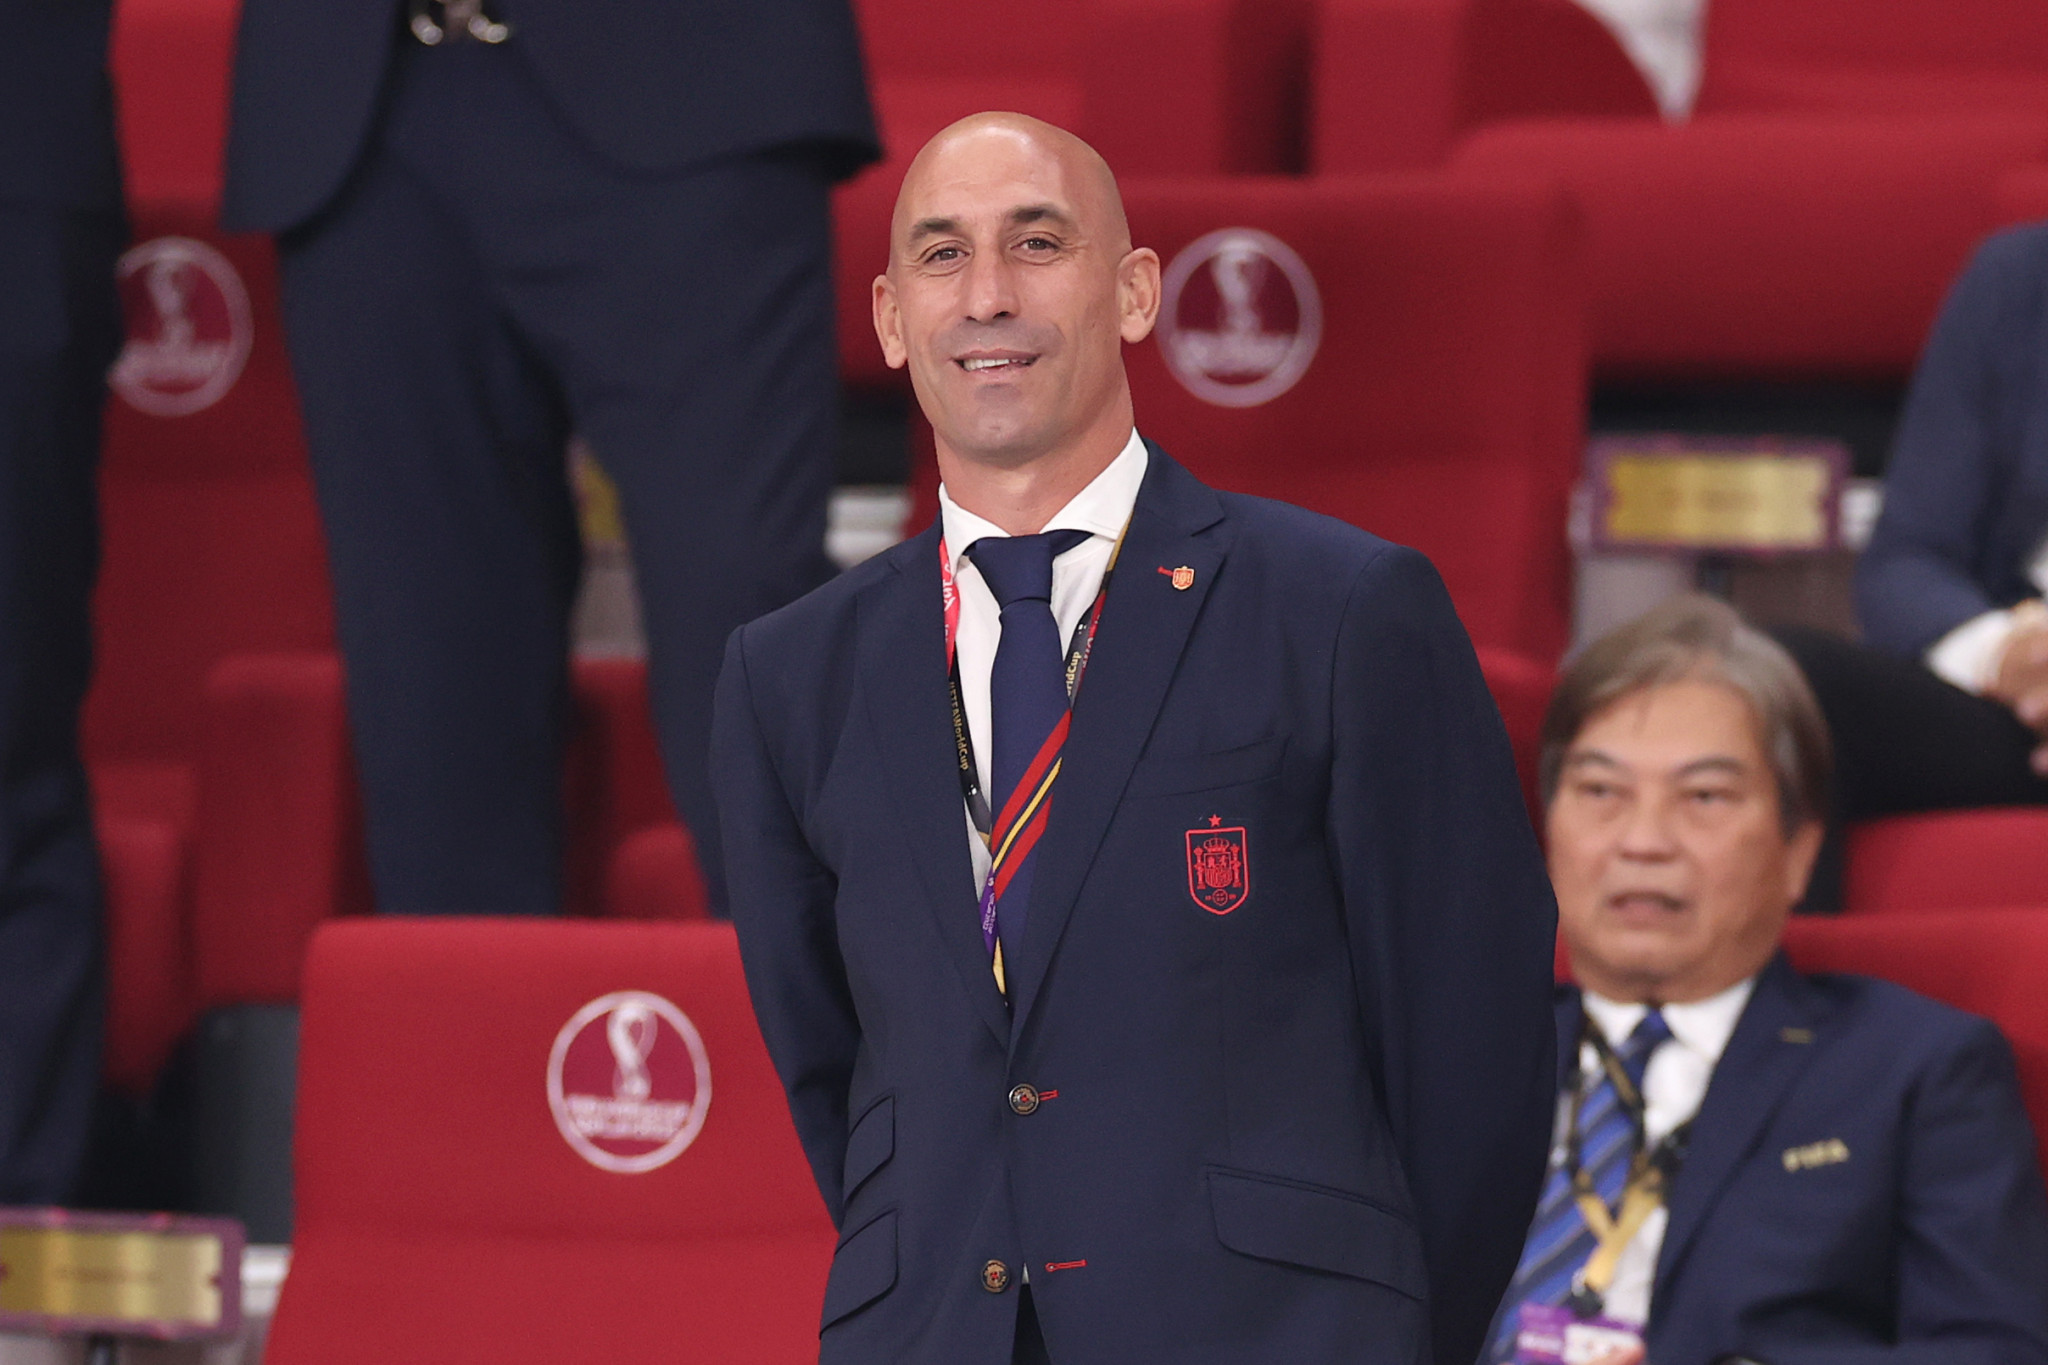 Rubiales used a speech at an RFEF Extraordinary General Assembly to claim 